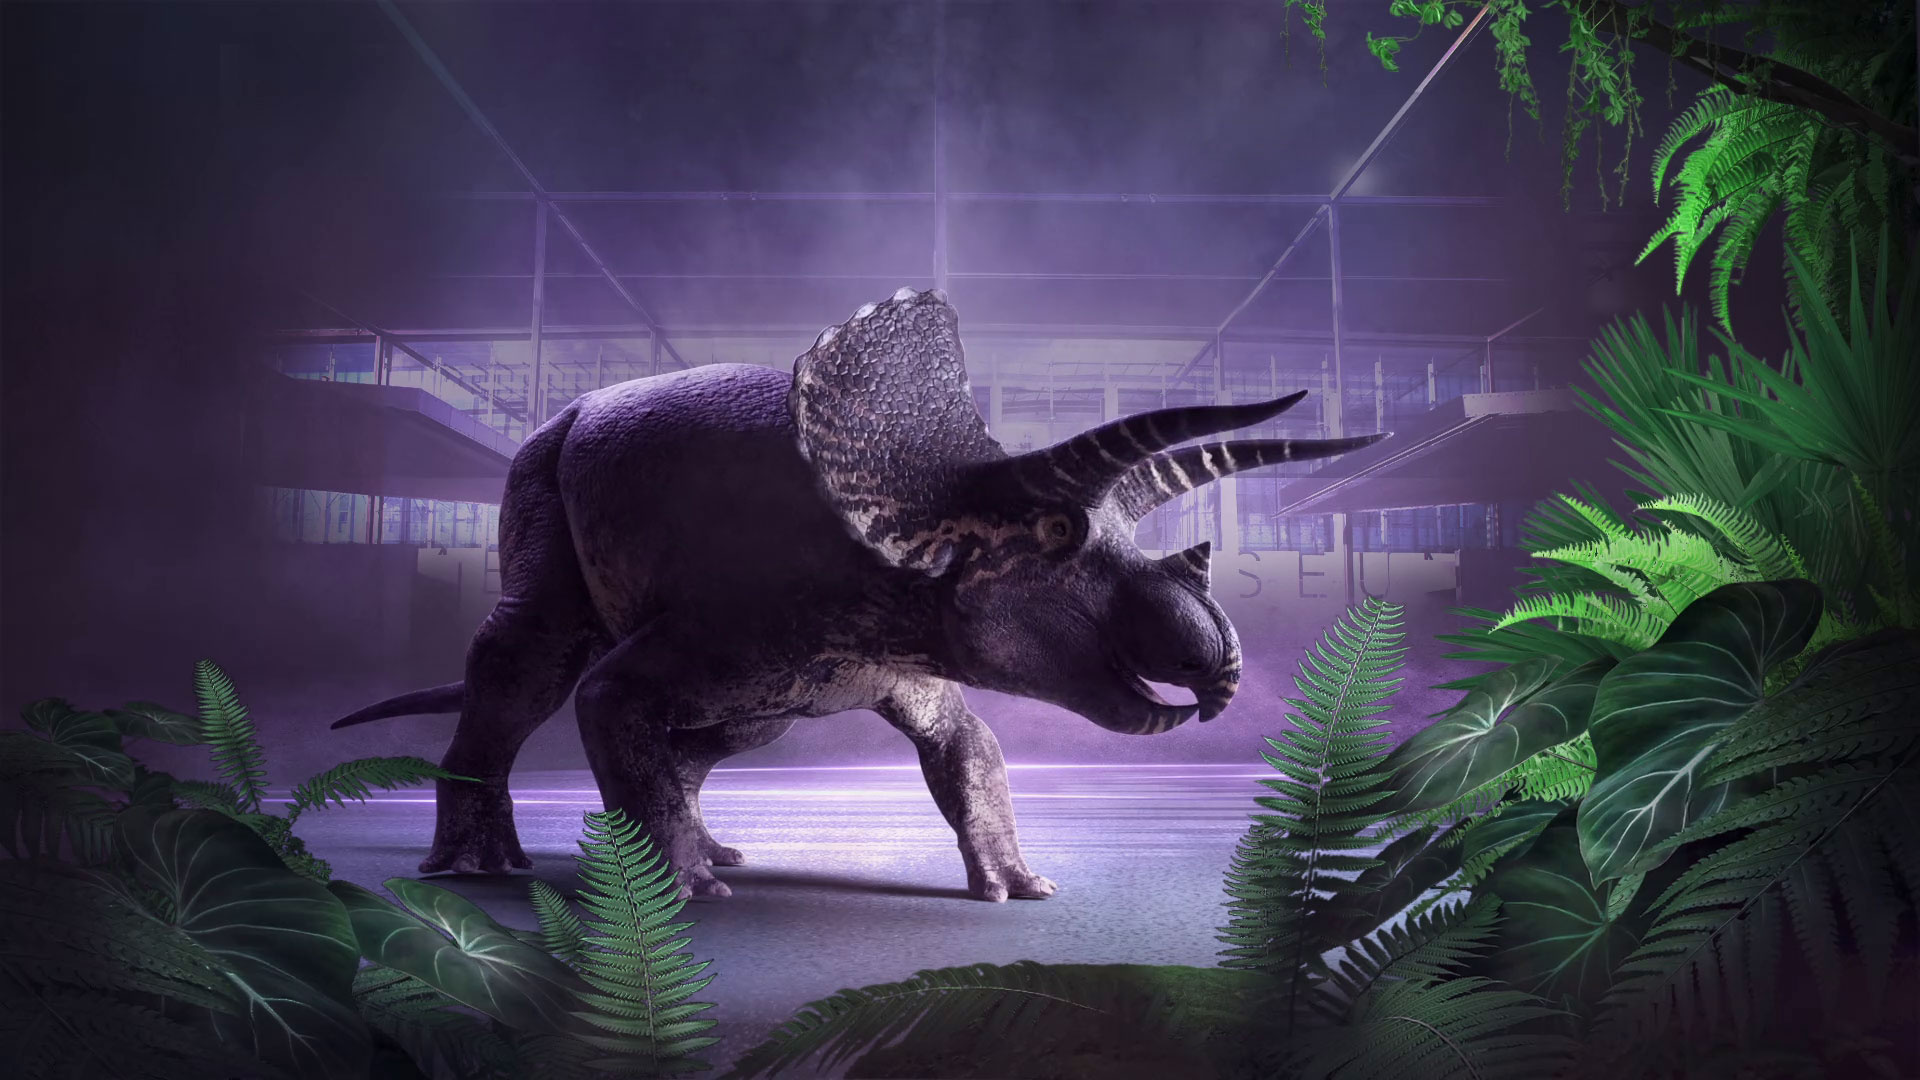 Triceratops, Fate of the dinosaurs, Melbourne museum, Extinction event, 1920x1080 Full HD Desktop